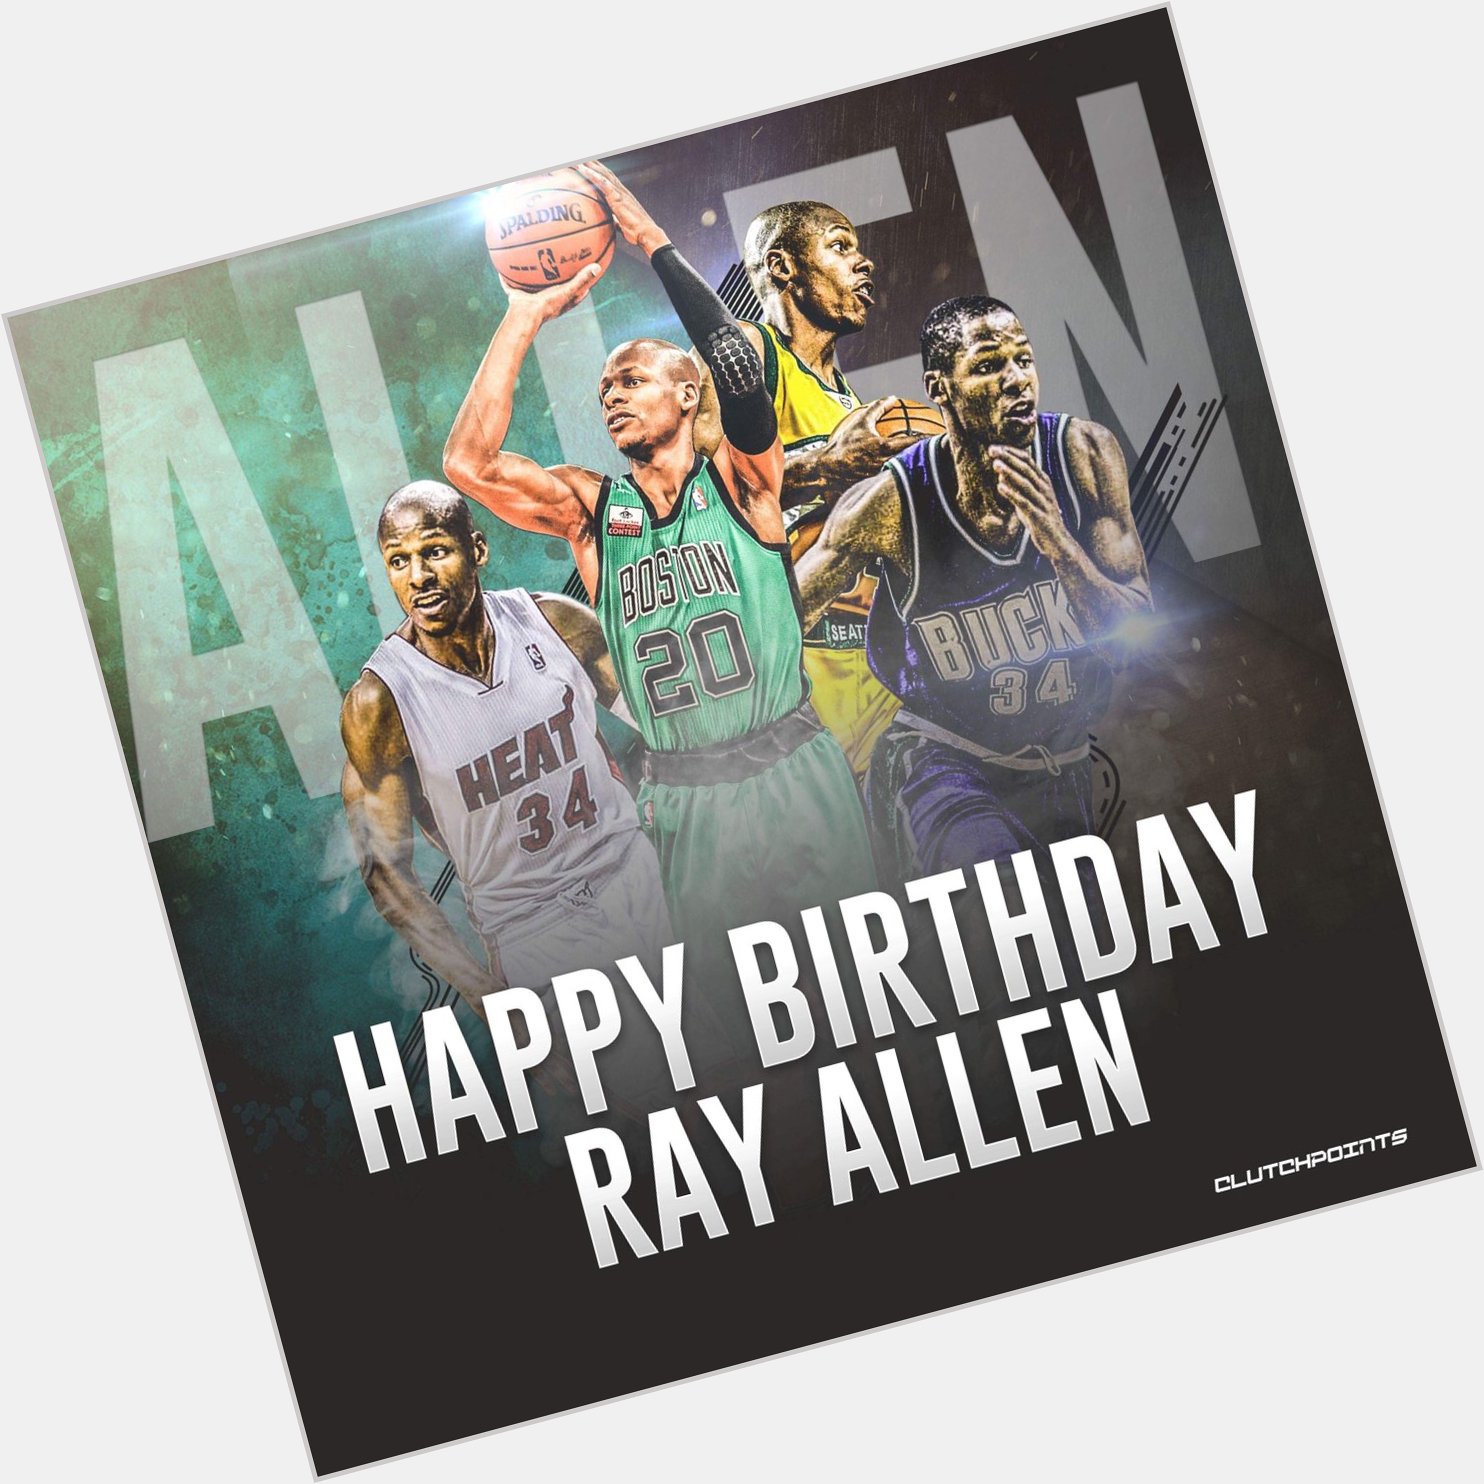 Happy Birthday to Ray Allen, who turns 43 today!  